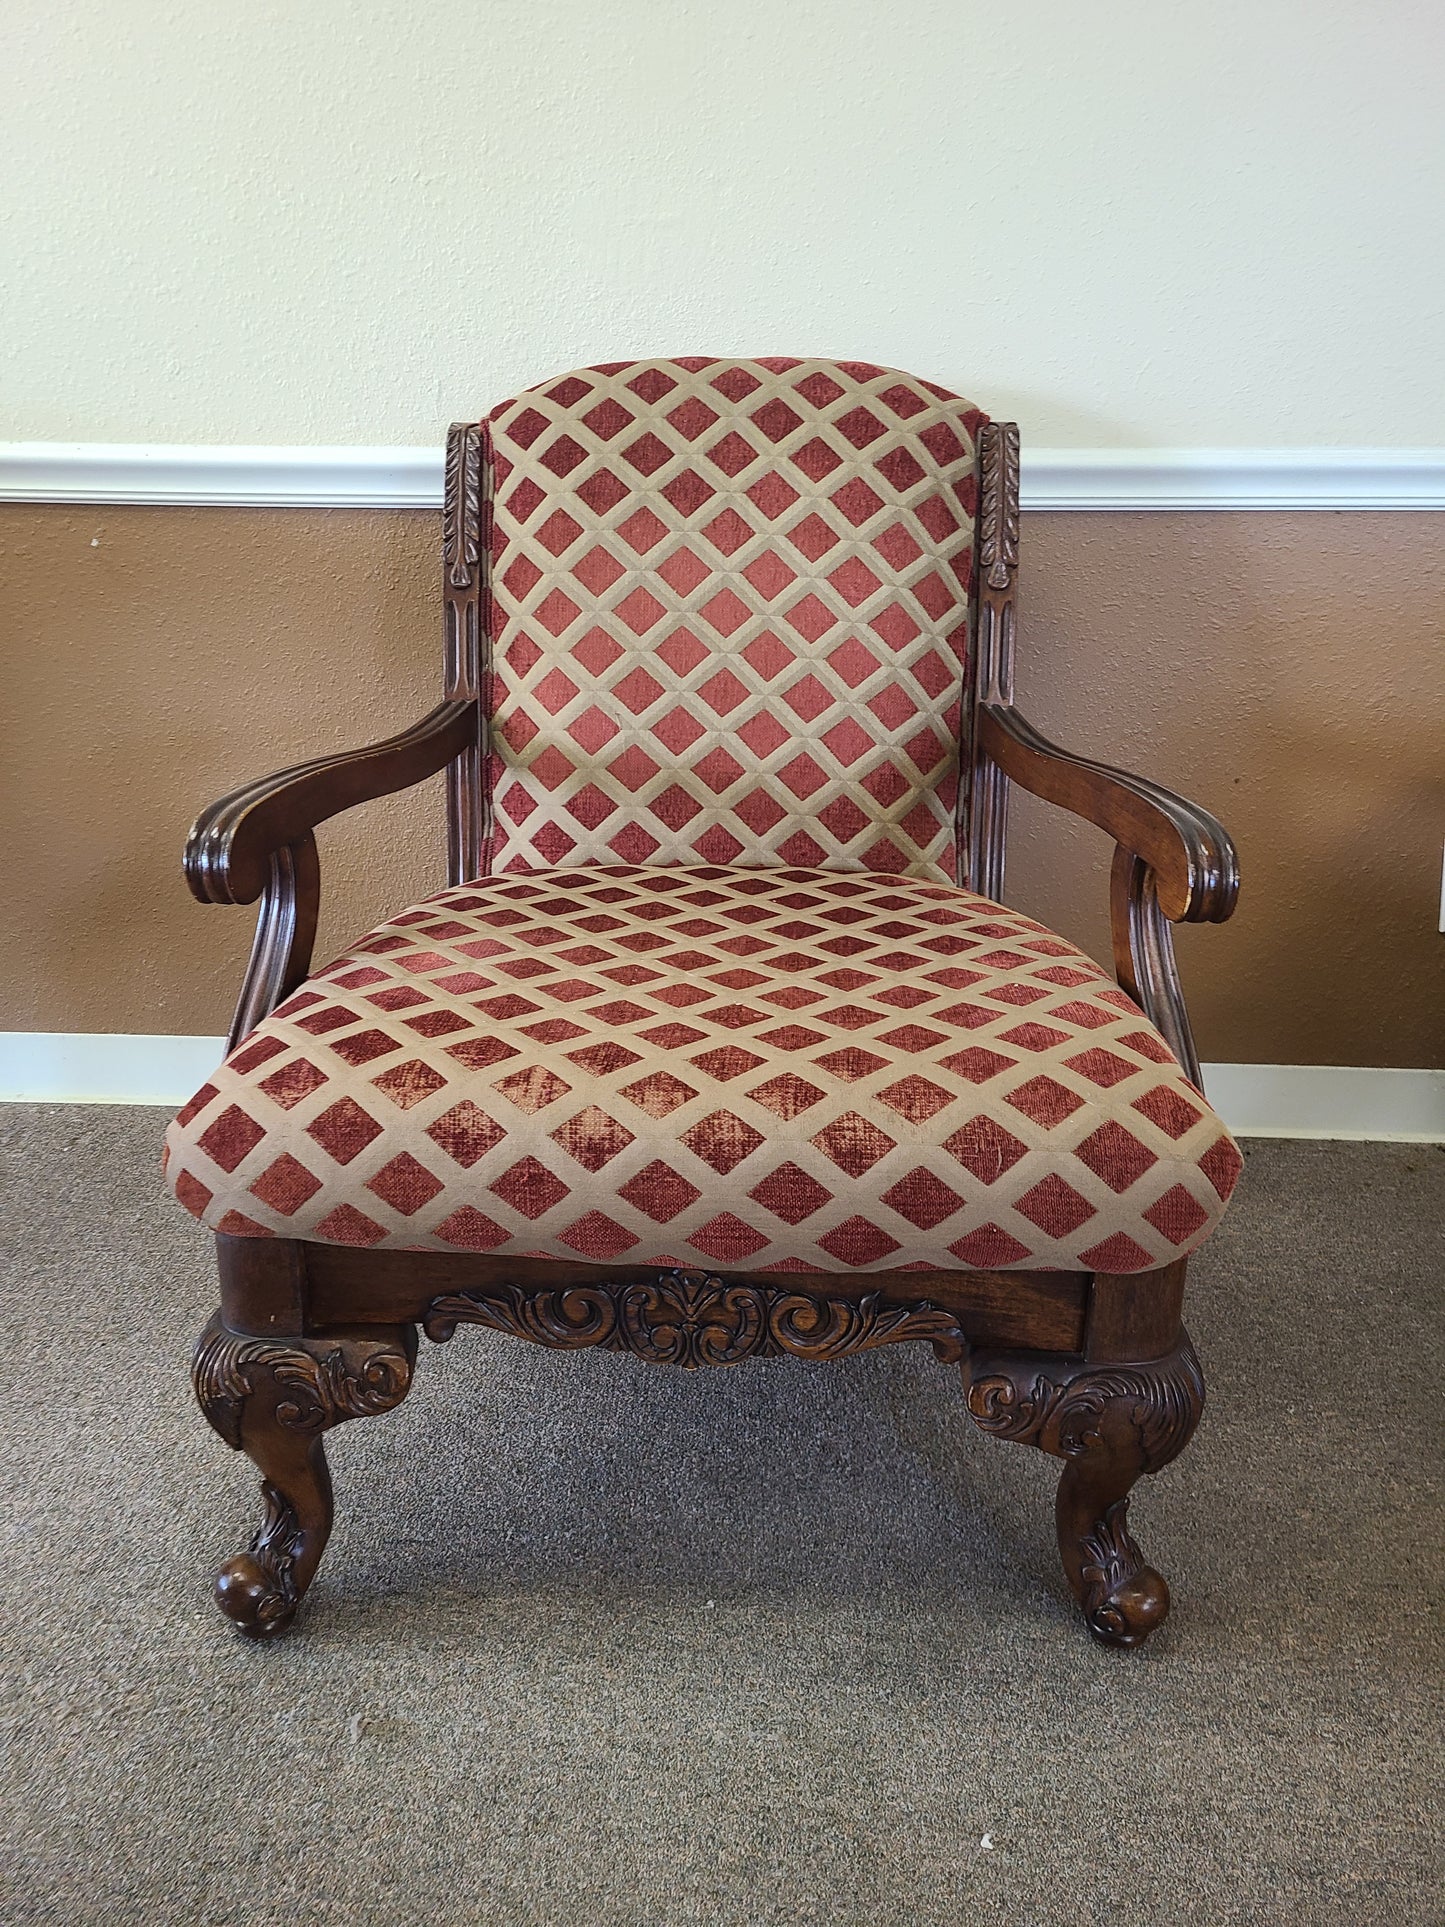 Stunning French Occassional Chair - AVAILABLE!